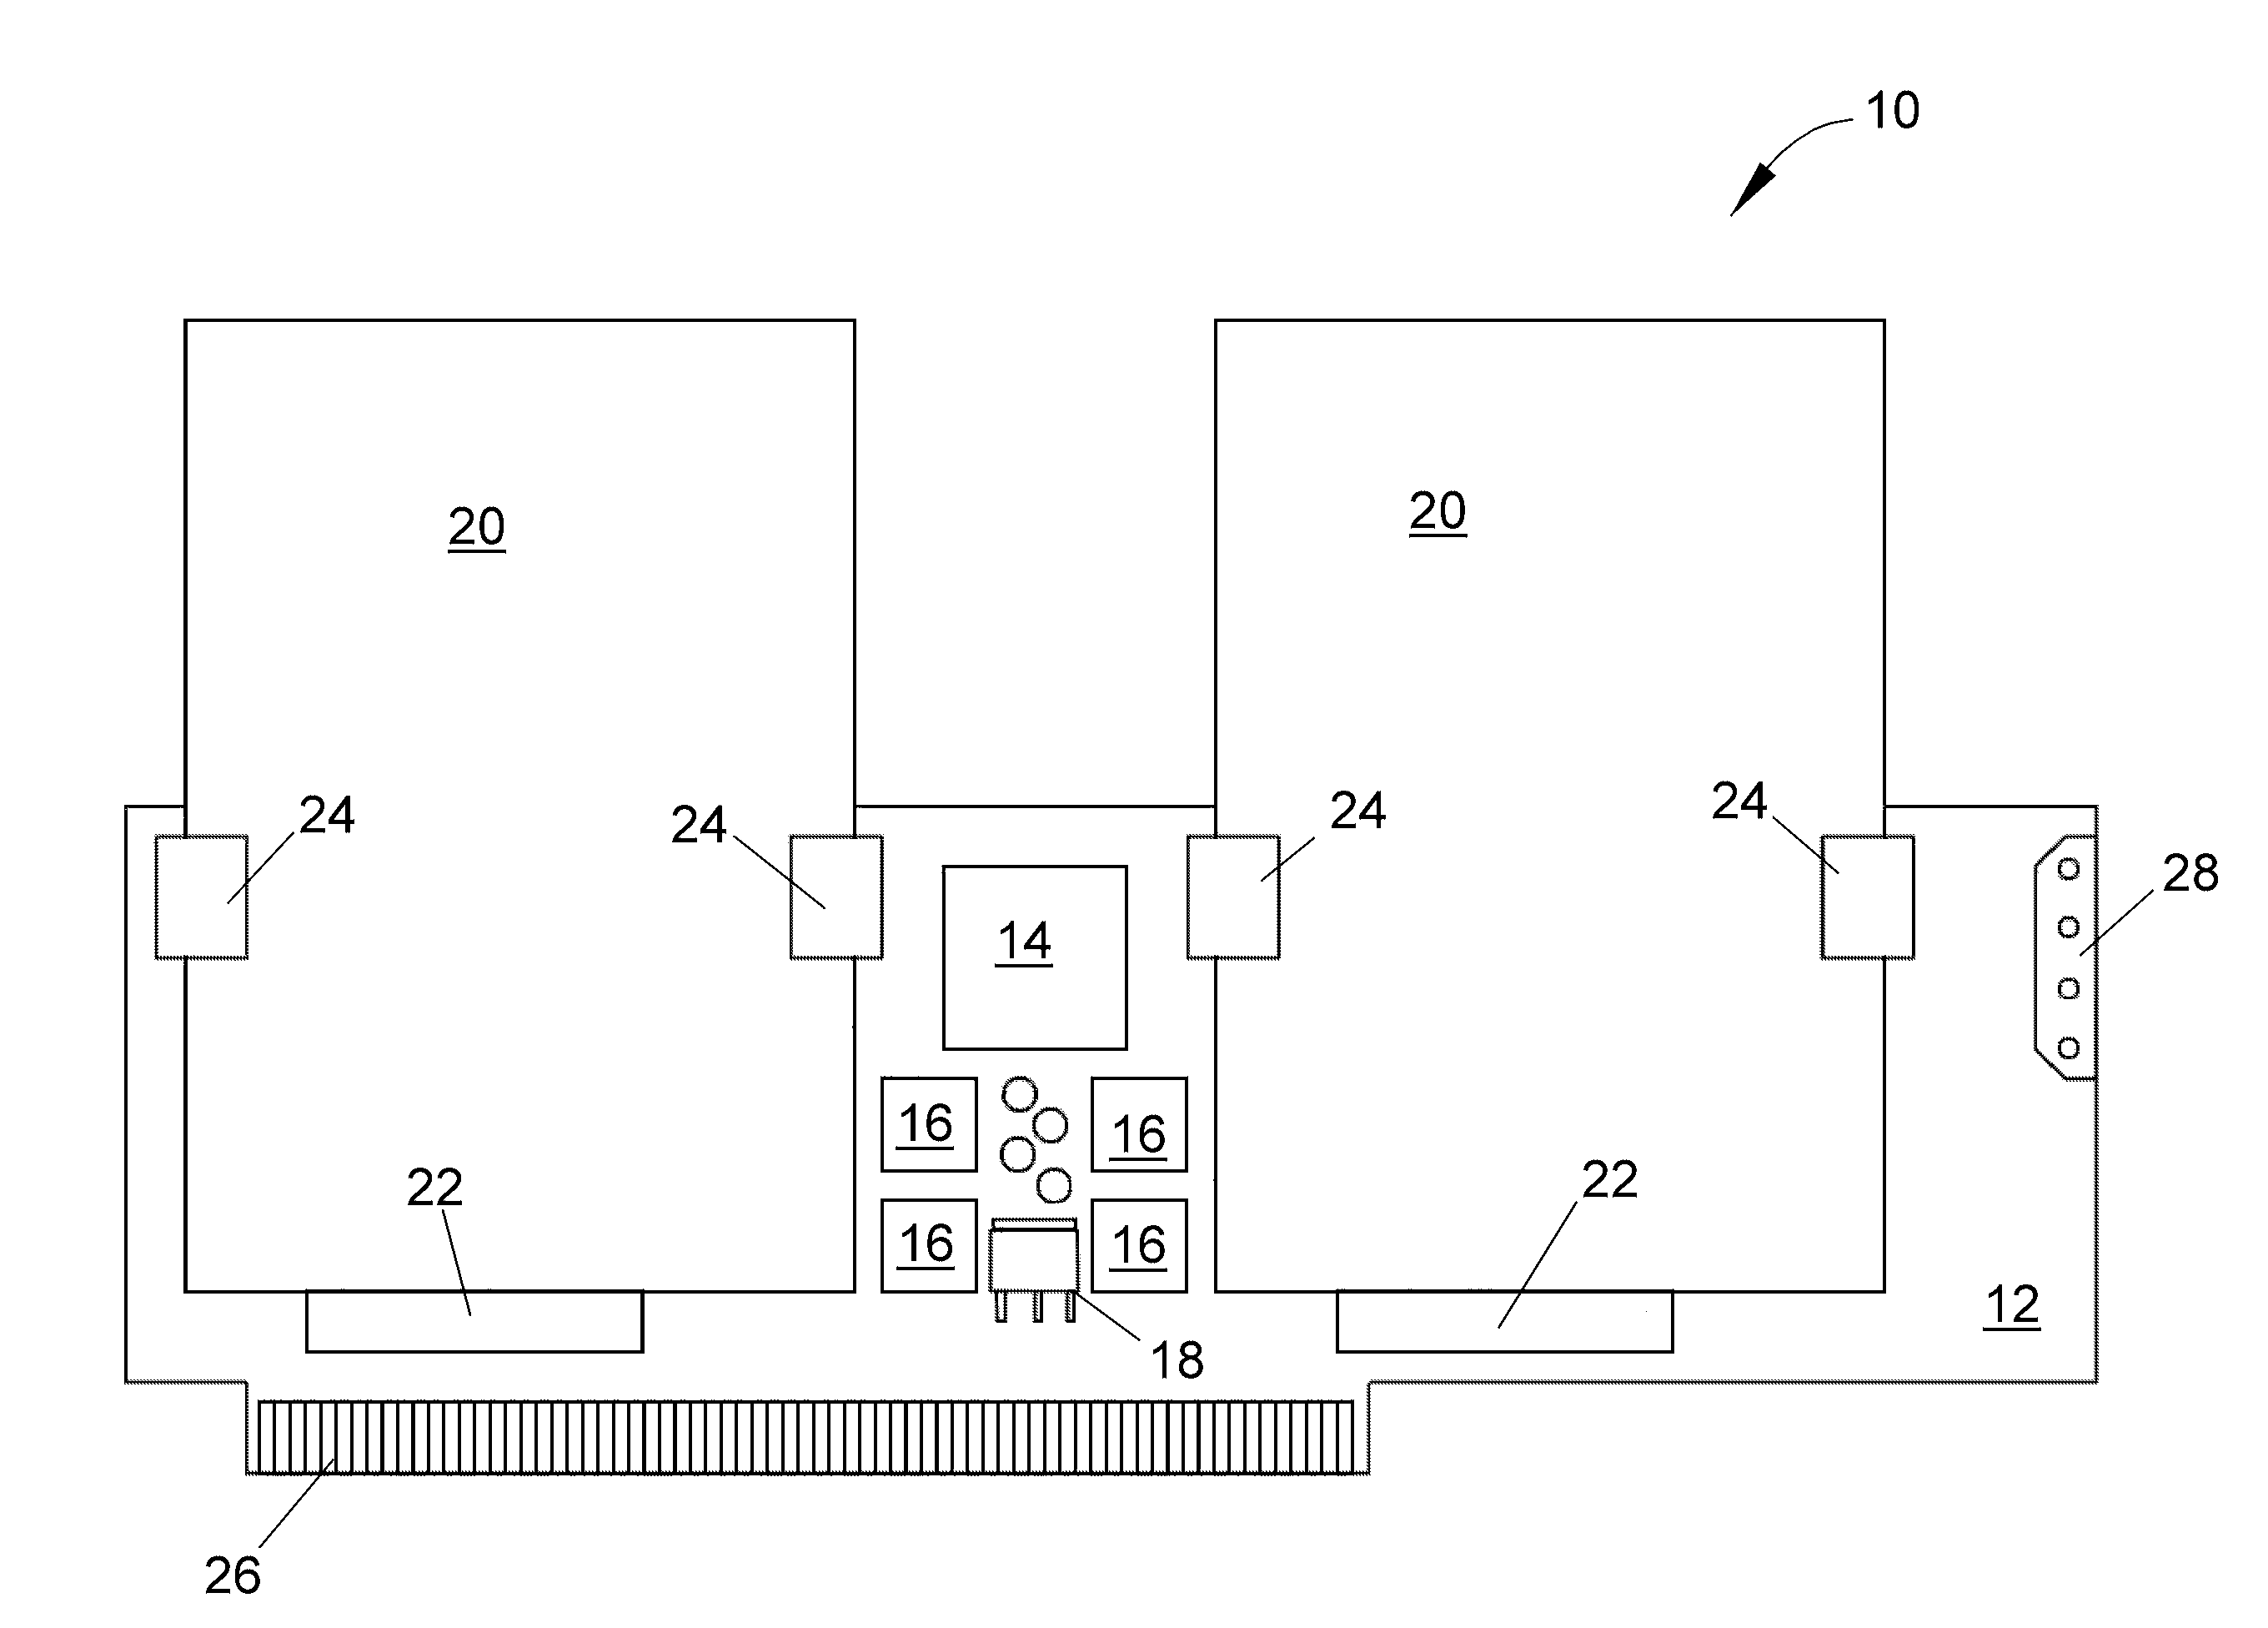 Mass storage system and method using hard disk and solid-state media